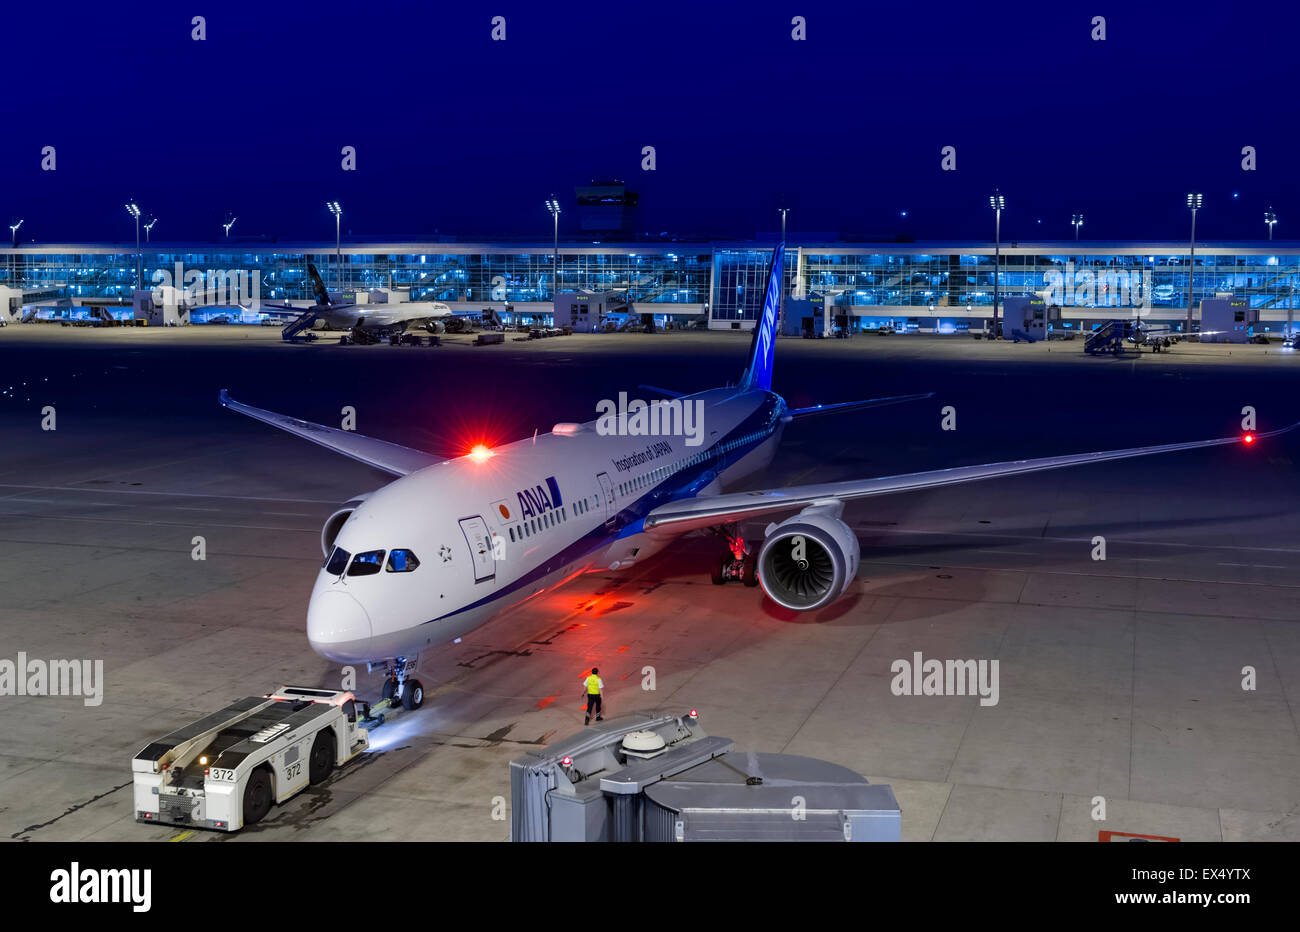 A Boeing 787-9 Dreamliner of the airline ANA at Terminal 2 at Munich Airport, Munich, Upper Bavaria, Bavaria, Germany Stock Photo